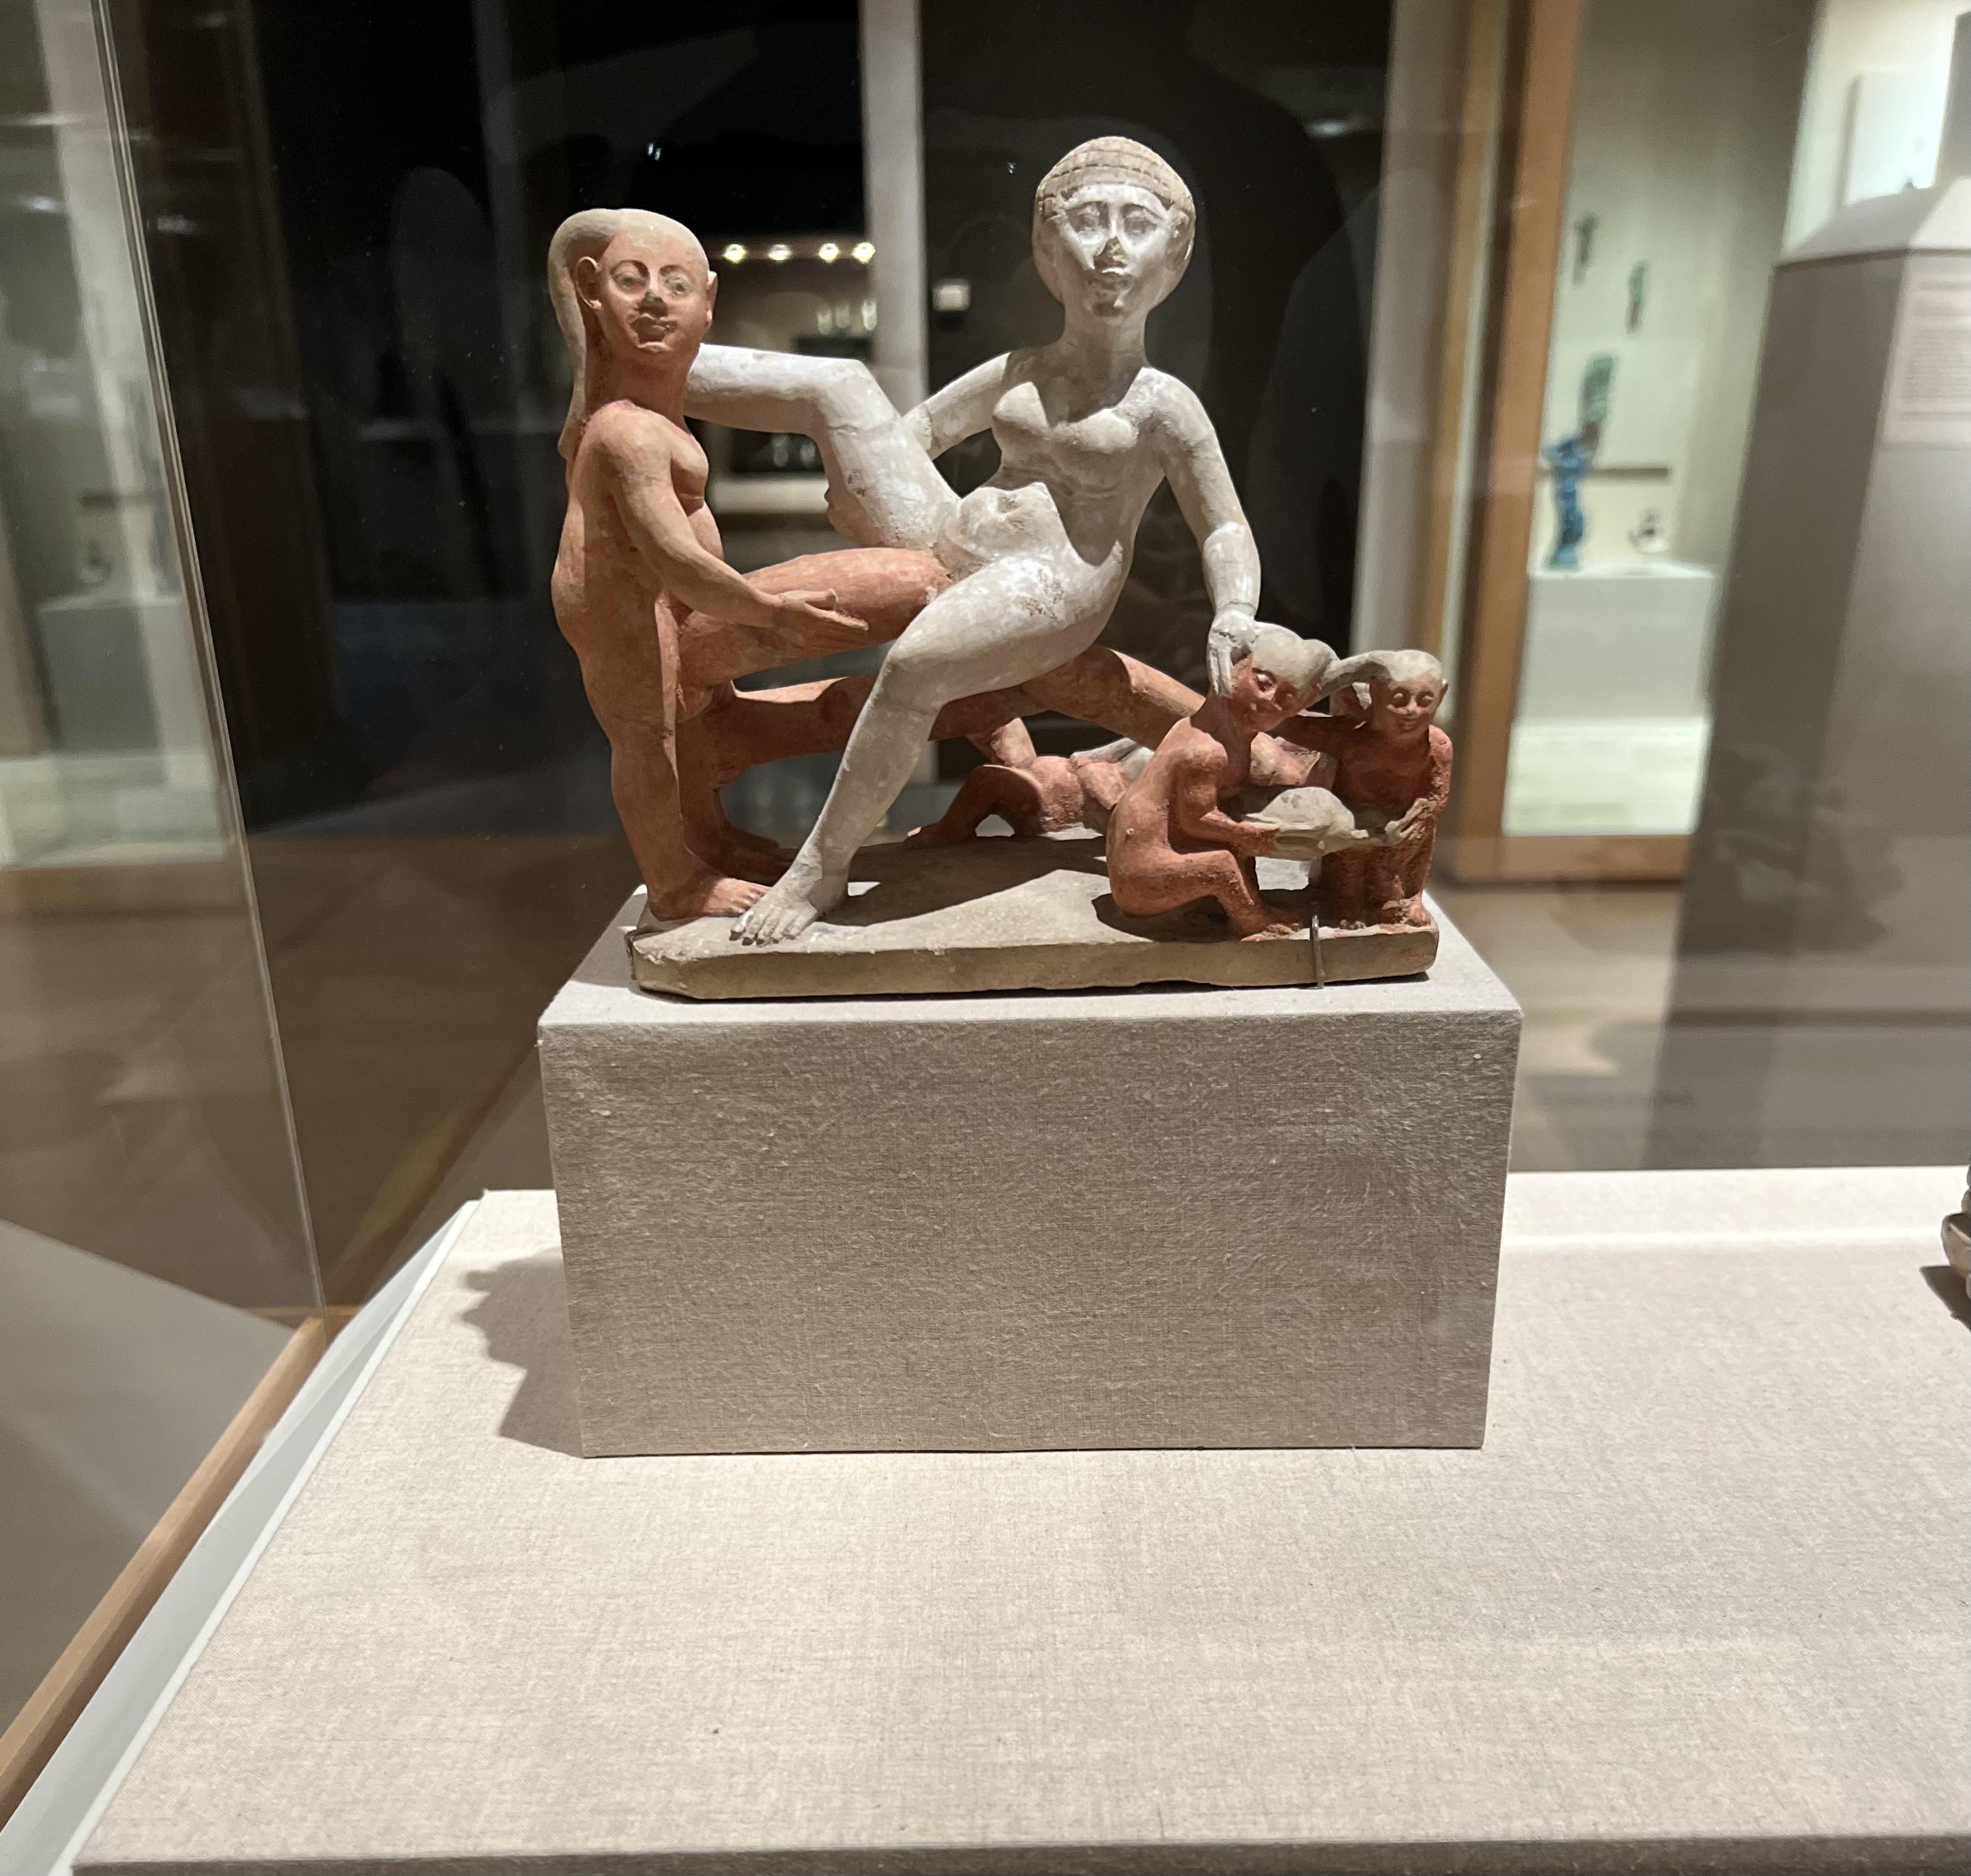 Erotic Composition made of limestone from the Ptolemaic Period in Egypt, 305-30 B.C. On display at the Brooklyn museum.jpg